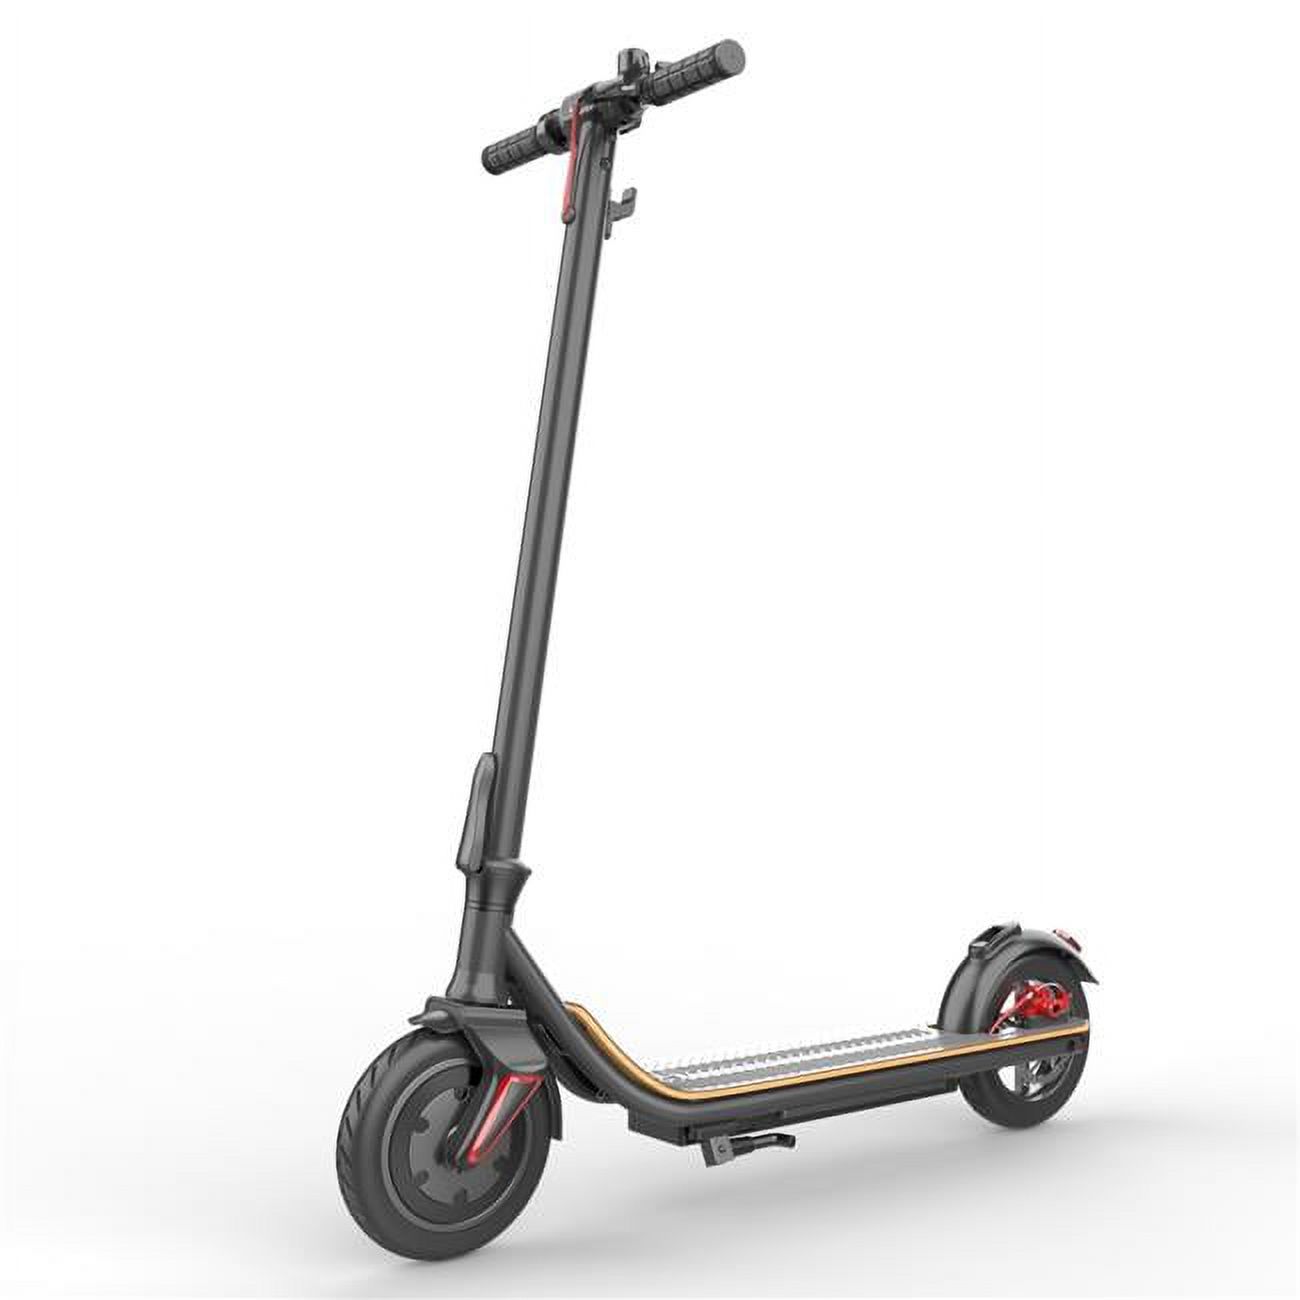 ES-S10X Foldable 350W Electric High Speed City Commute Scooter, Black - image 1 of 1